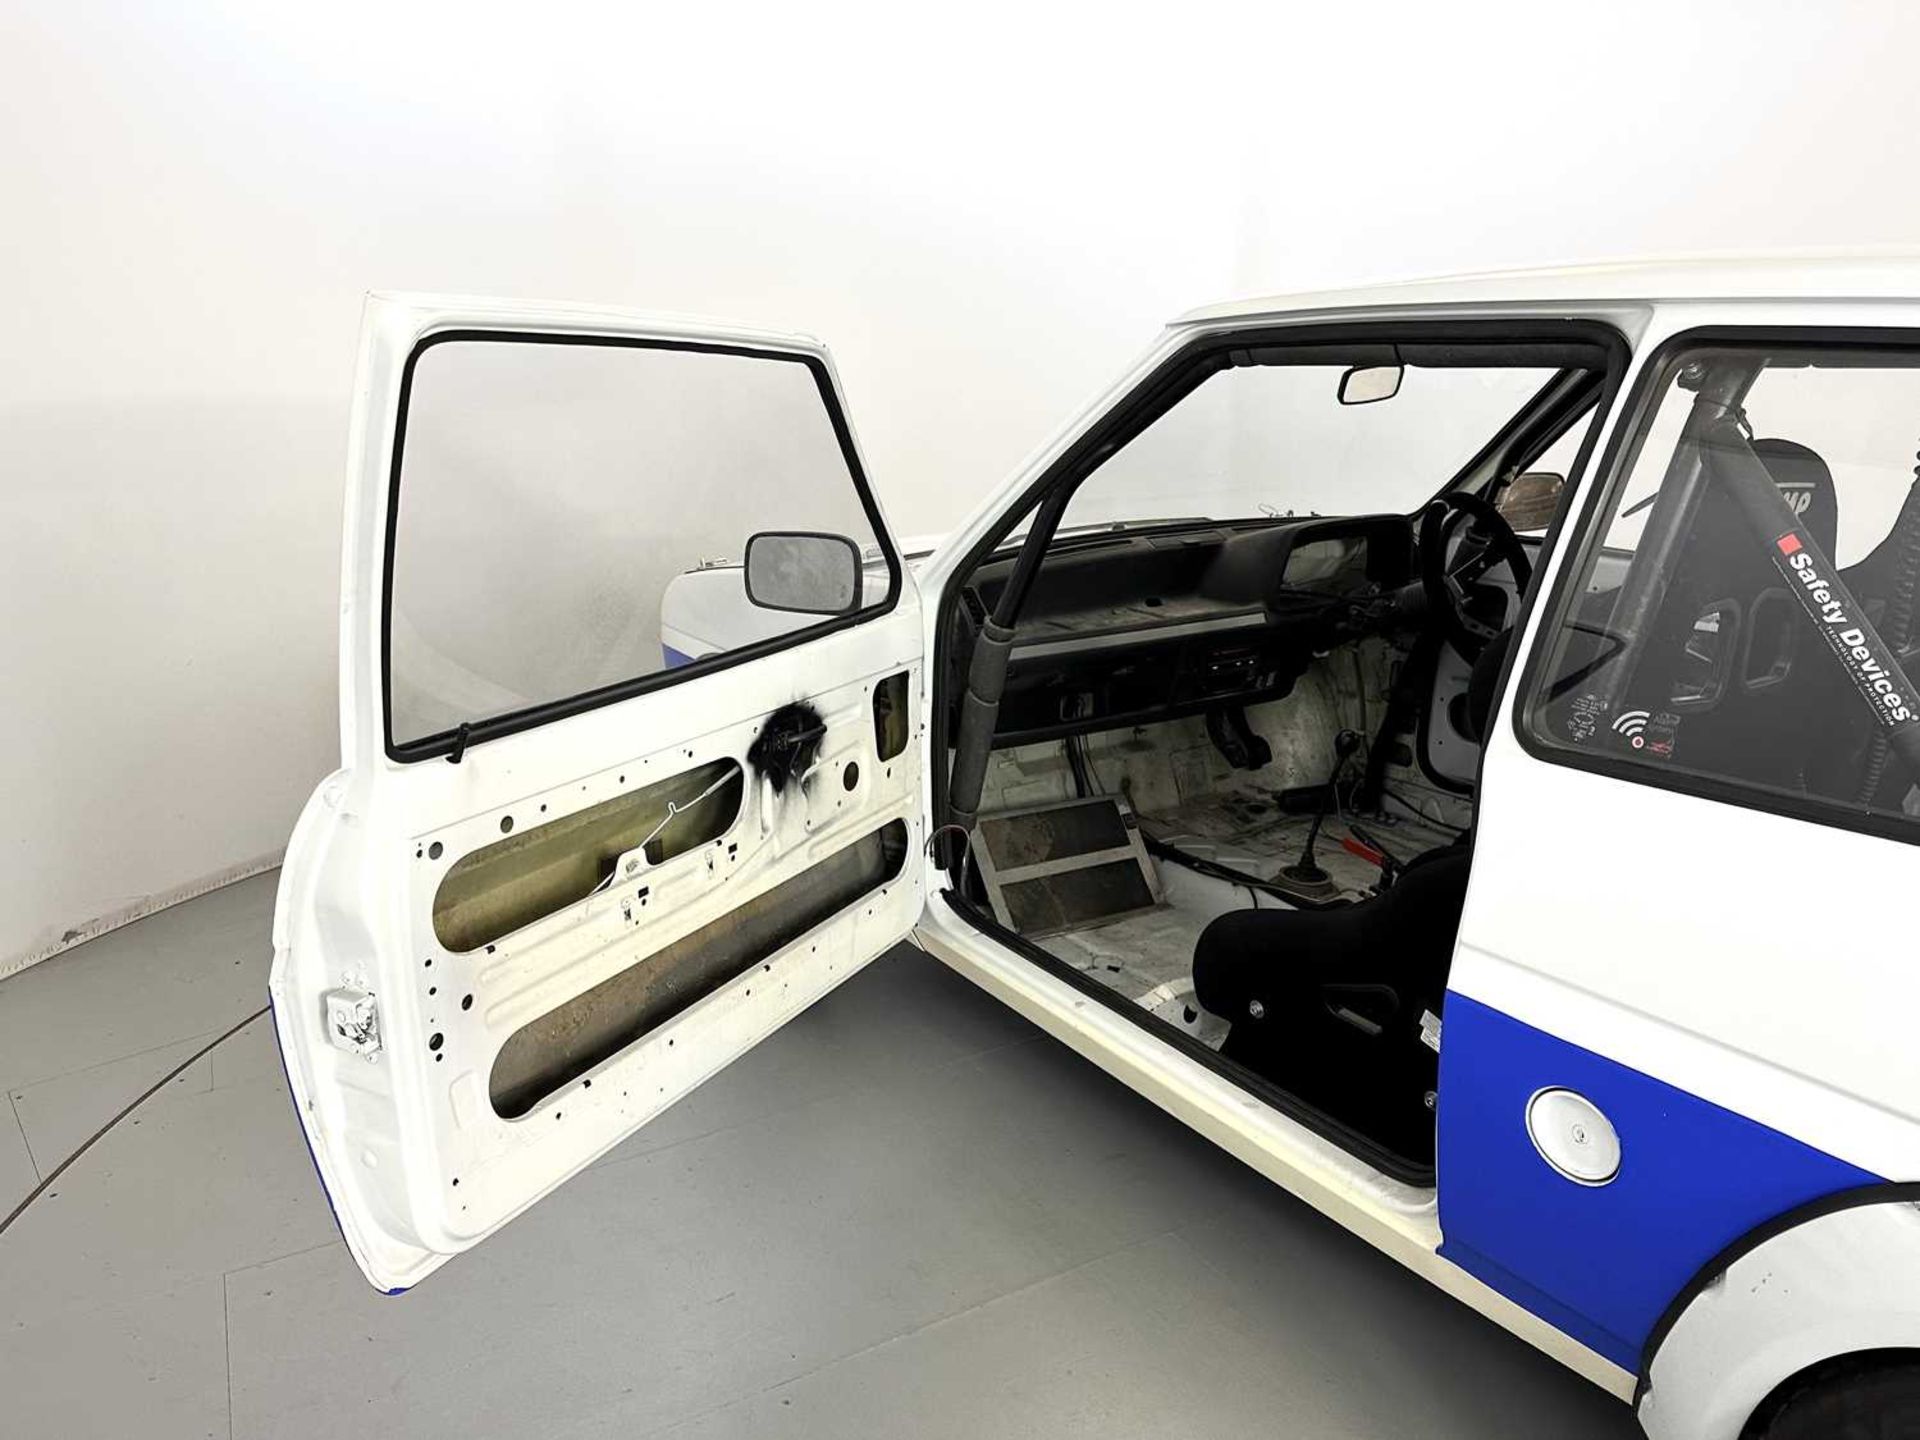 1983 Ford Fiesta XR2 - Image 20 of 28